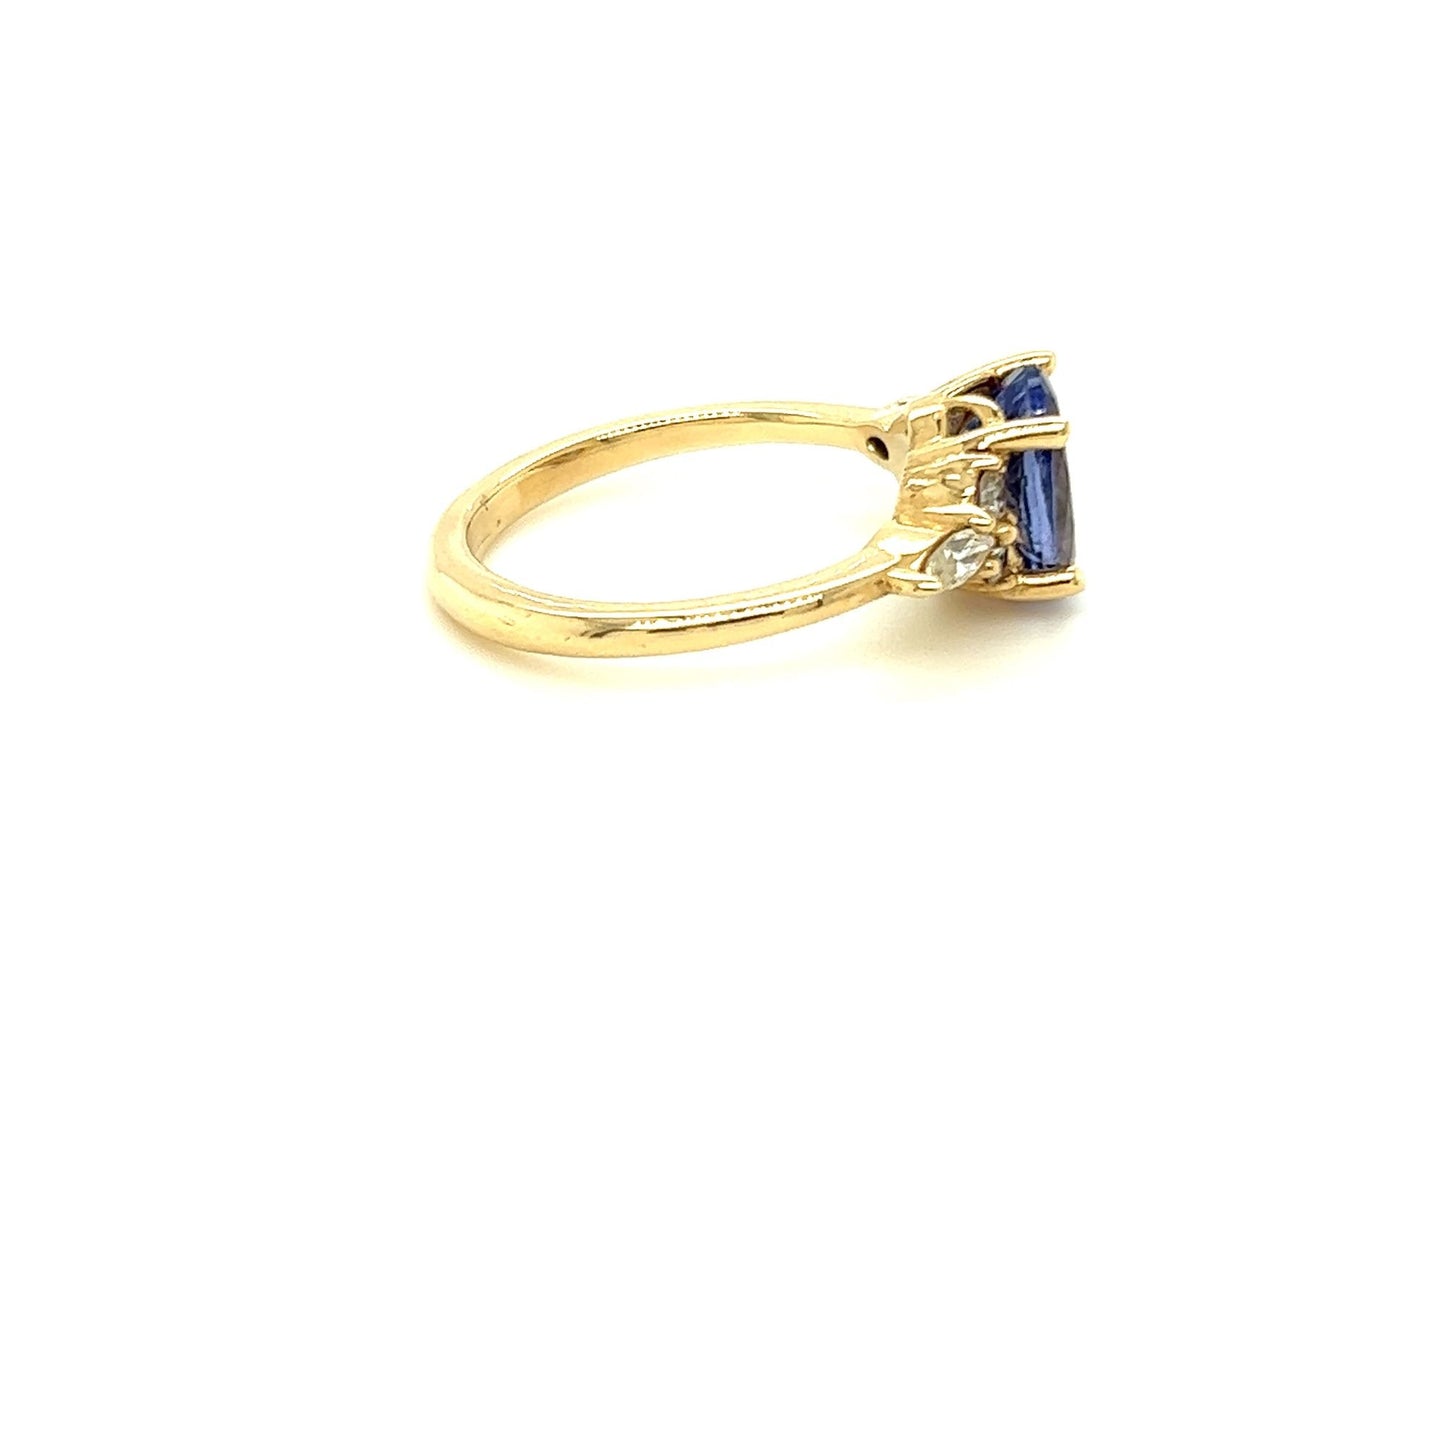 14kt Yellow Gold Oval Cut Tanzanite Ring w/ Diamond Accented Sides